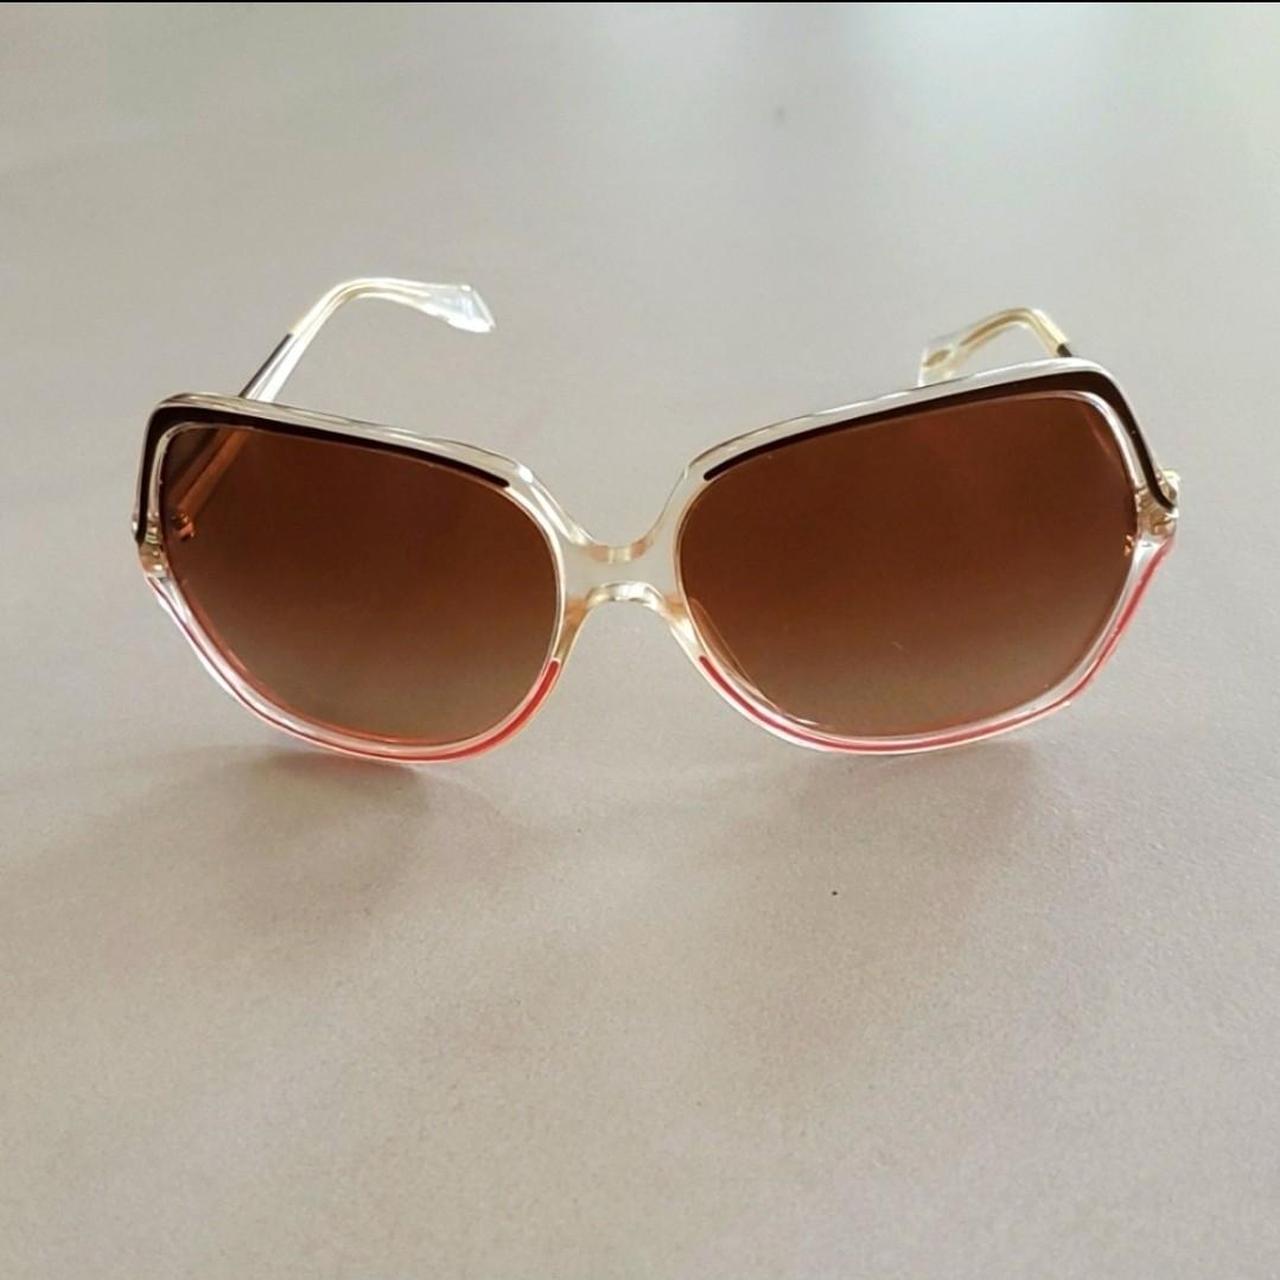 Product Image 1 - Oliver Peoples Oversized Sunglasses
Flawless condition,